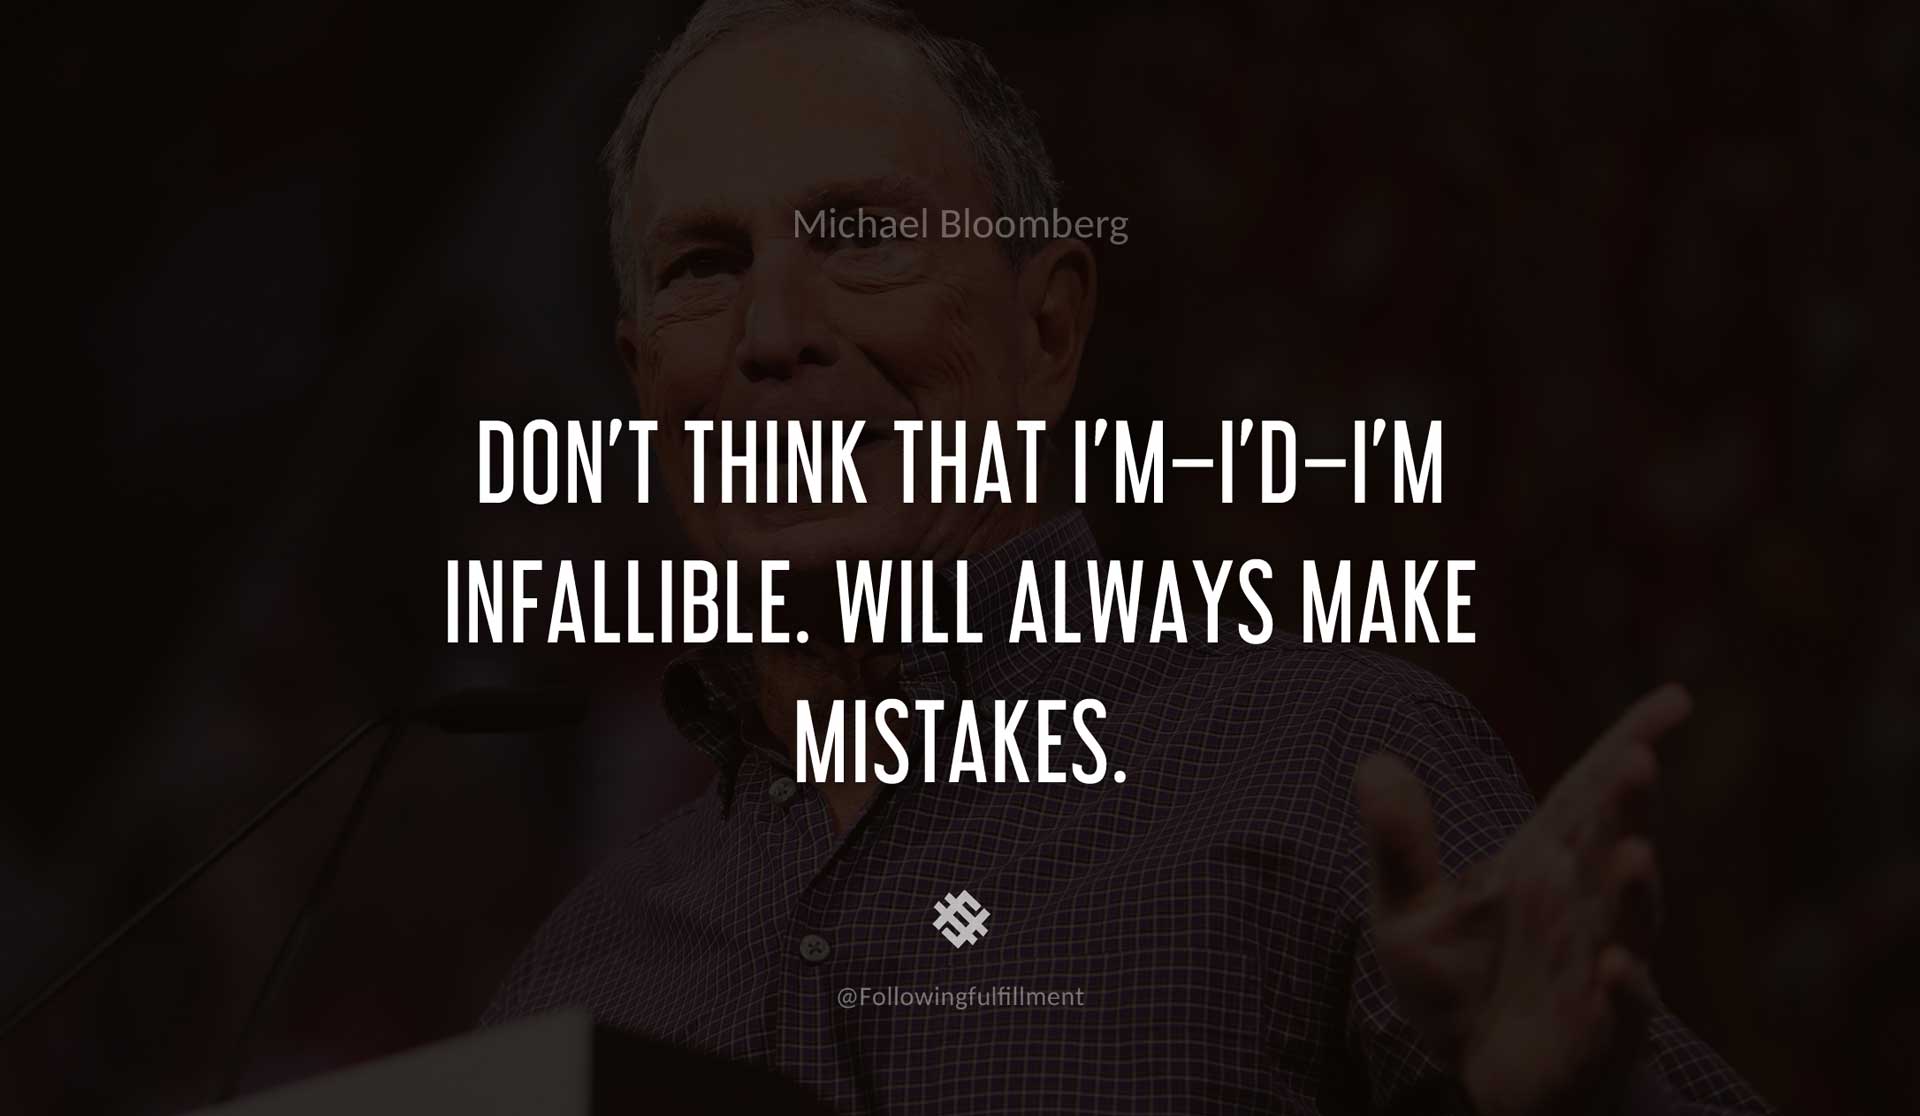 Don't-think-that-I'm-I'd-I'm-infallible.-Will-always-make-mistakes.--MICHAEL-BLOOMBERG-Quote.jpg